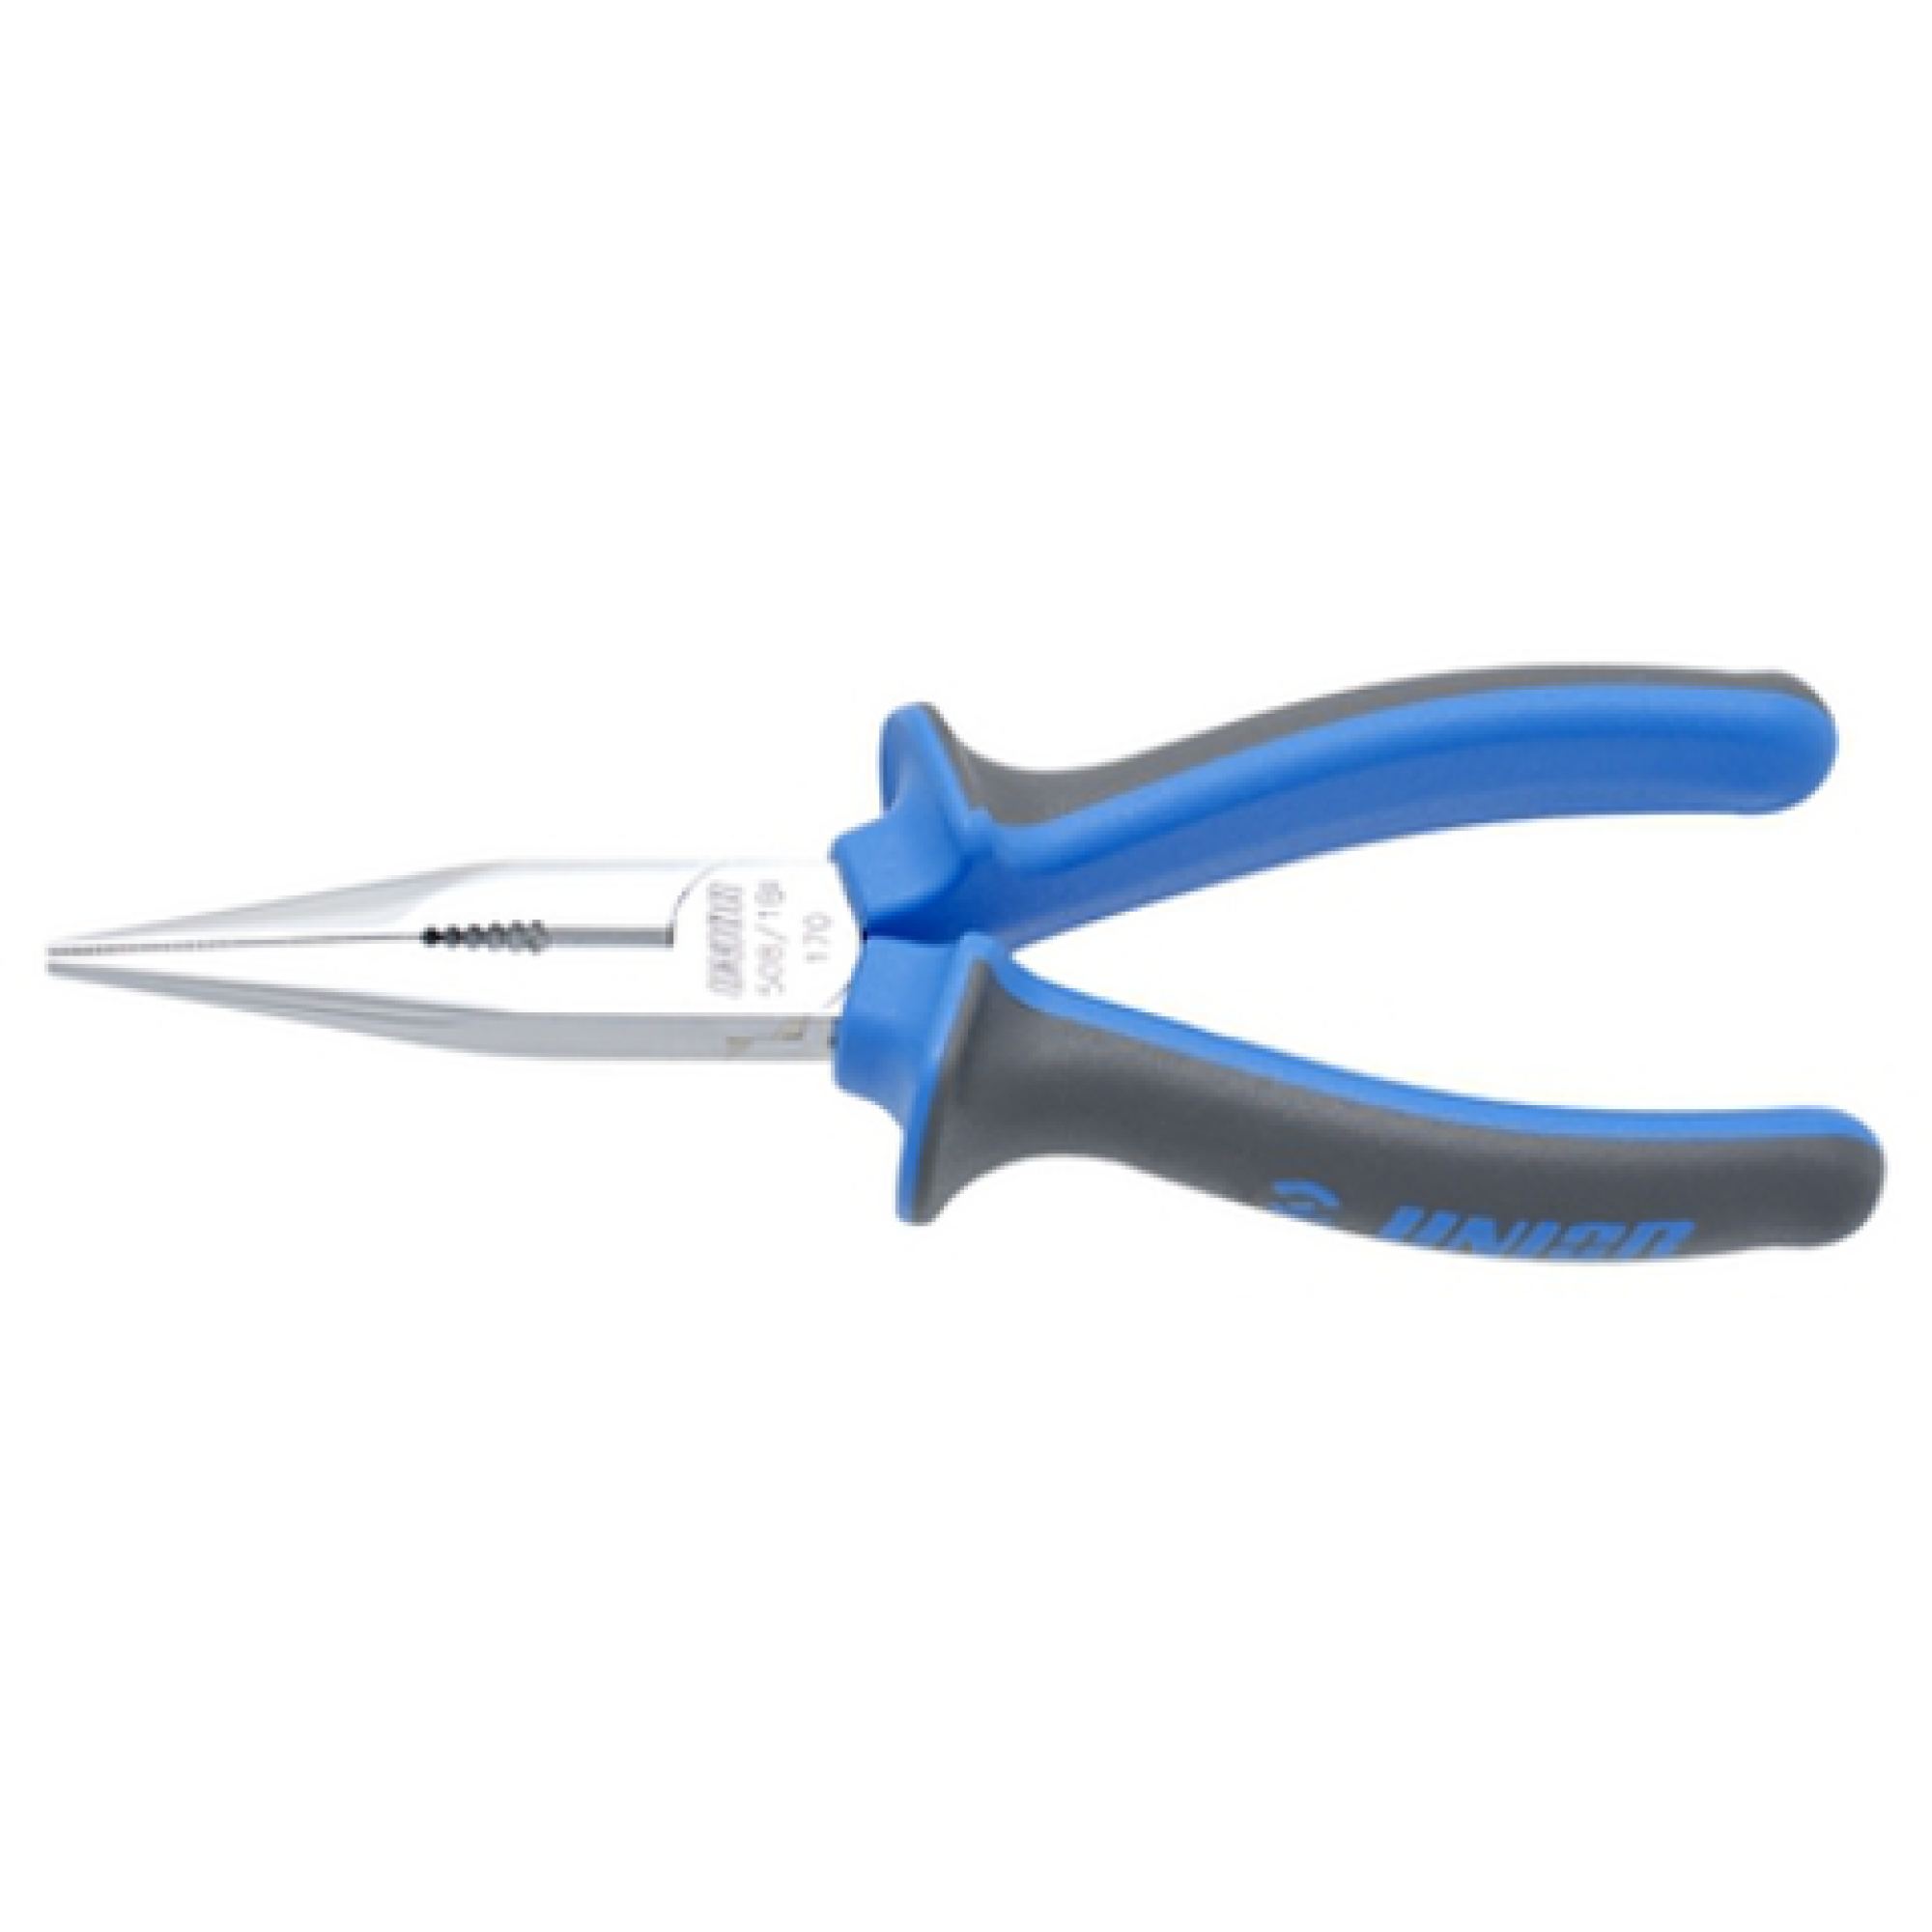 Long nose pliers with side cutter and pipe grip, straight